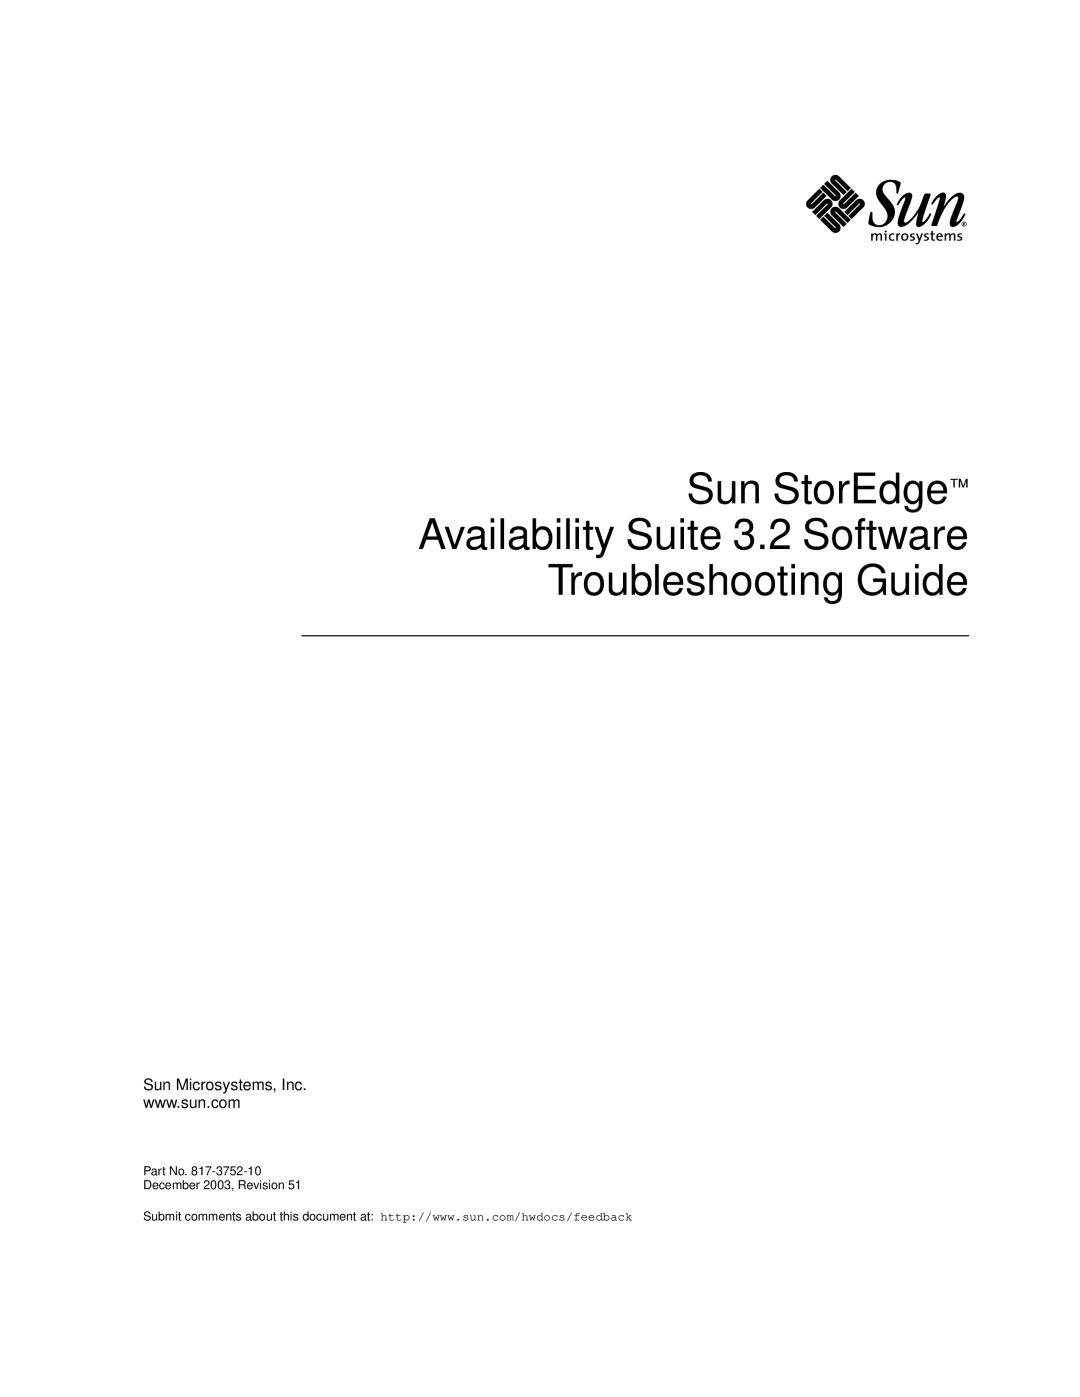 Sun Microsystems manual Sun StorEdge Availability Suite 3.2 Software, Troubleshooting Guide 